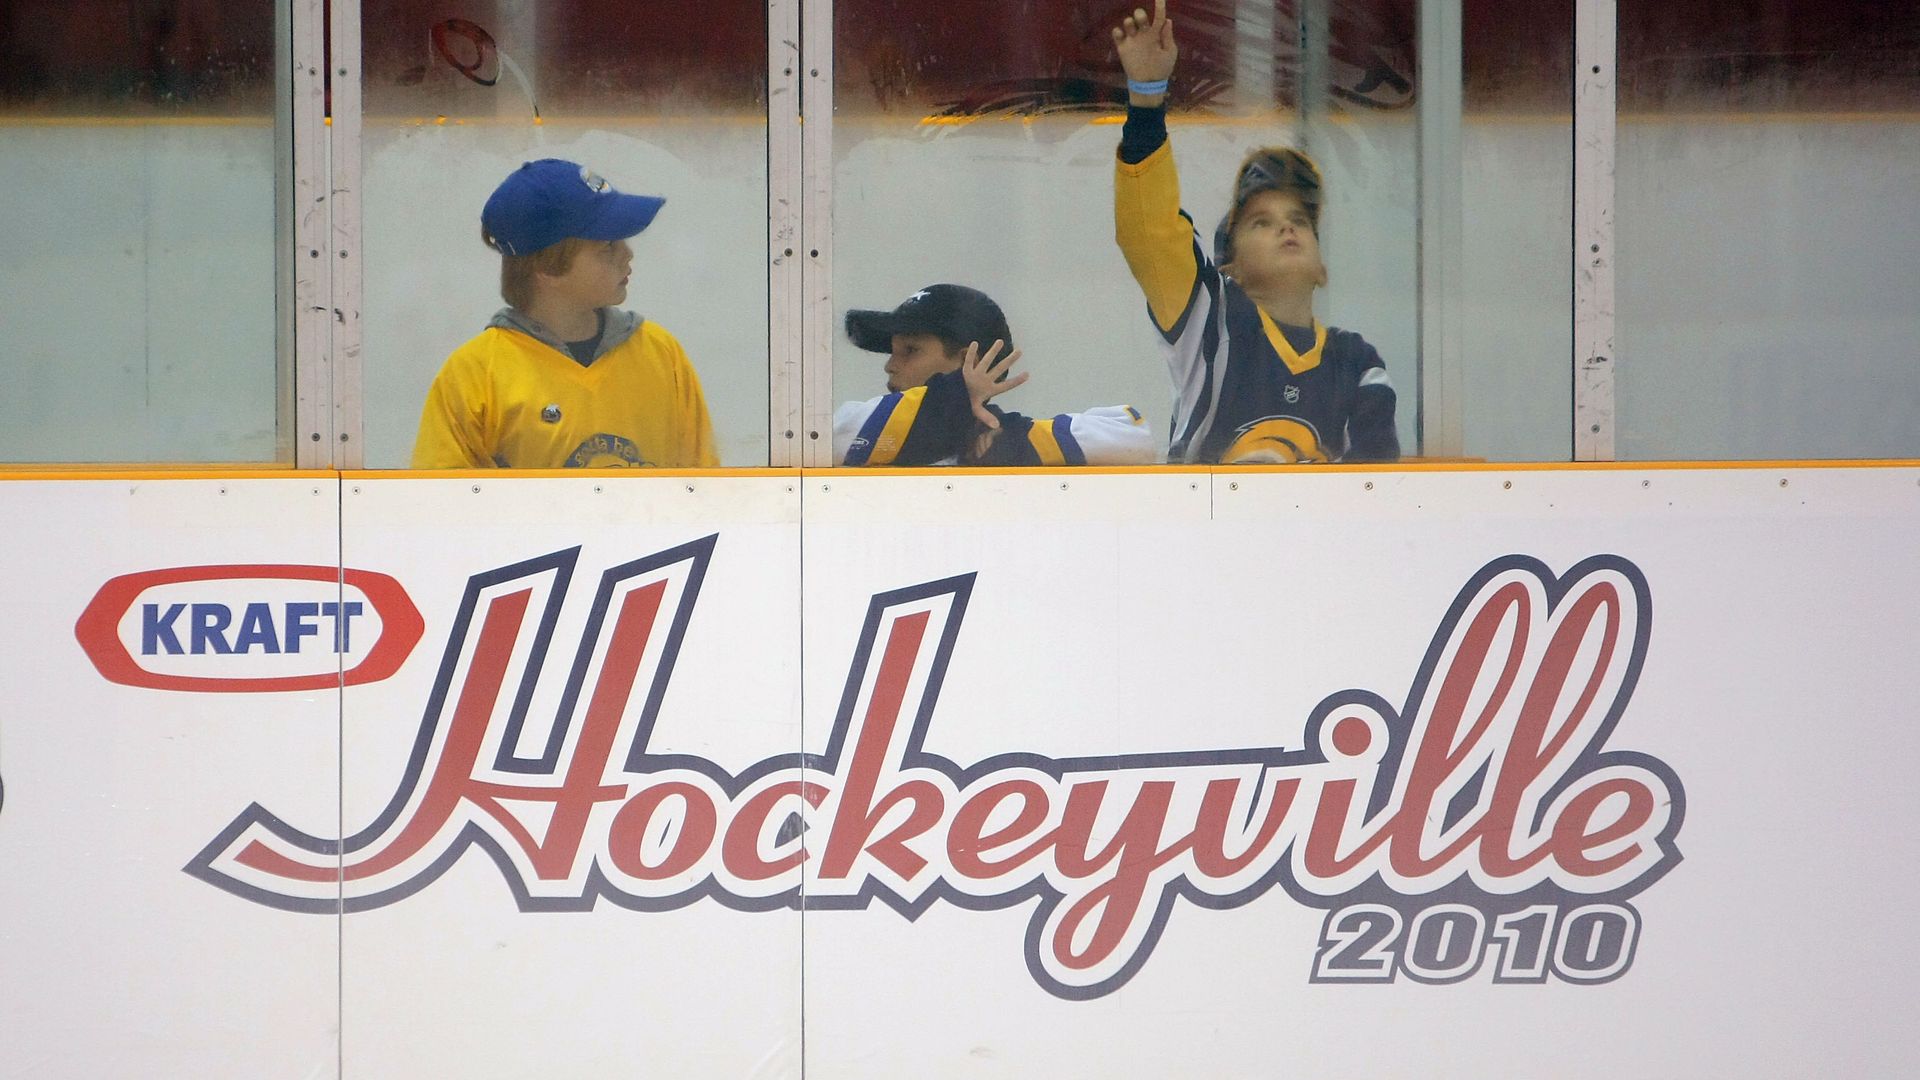 Three children at hockey rink watching through the glass, with a Kraft sign etched into the wall just below them